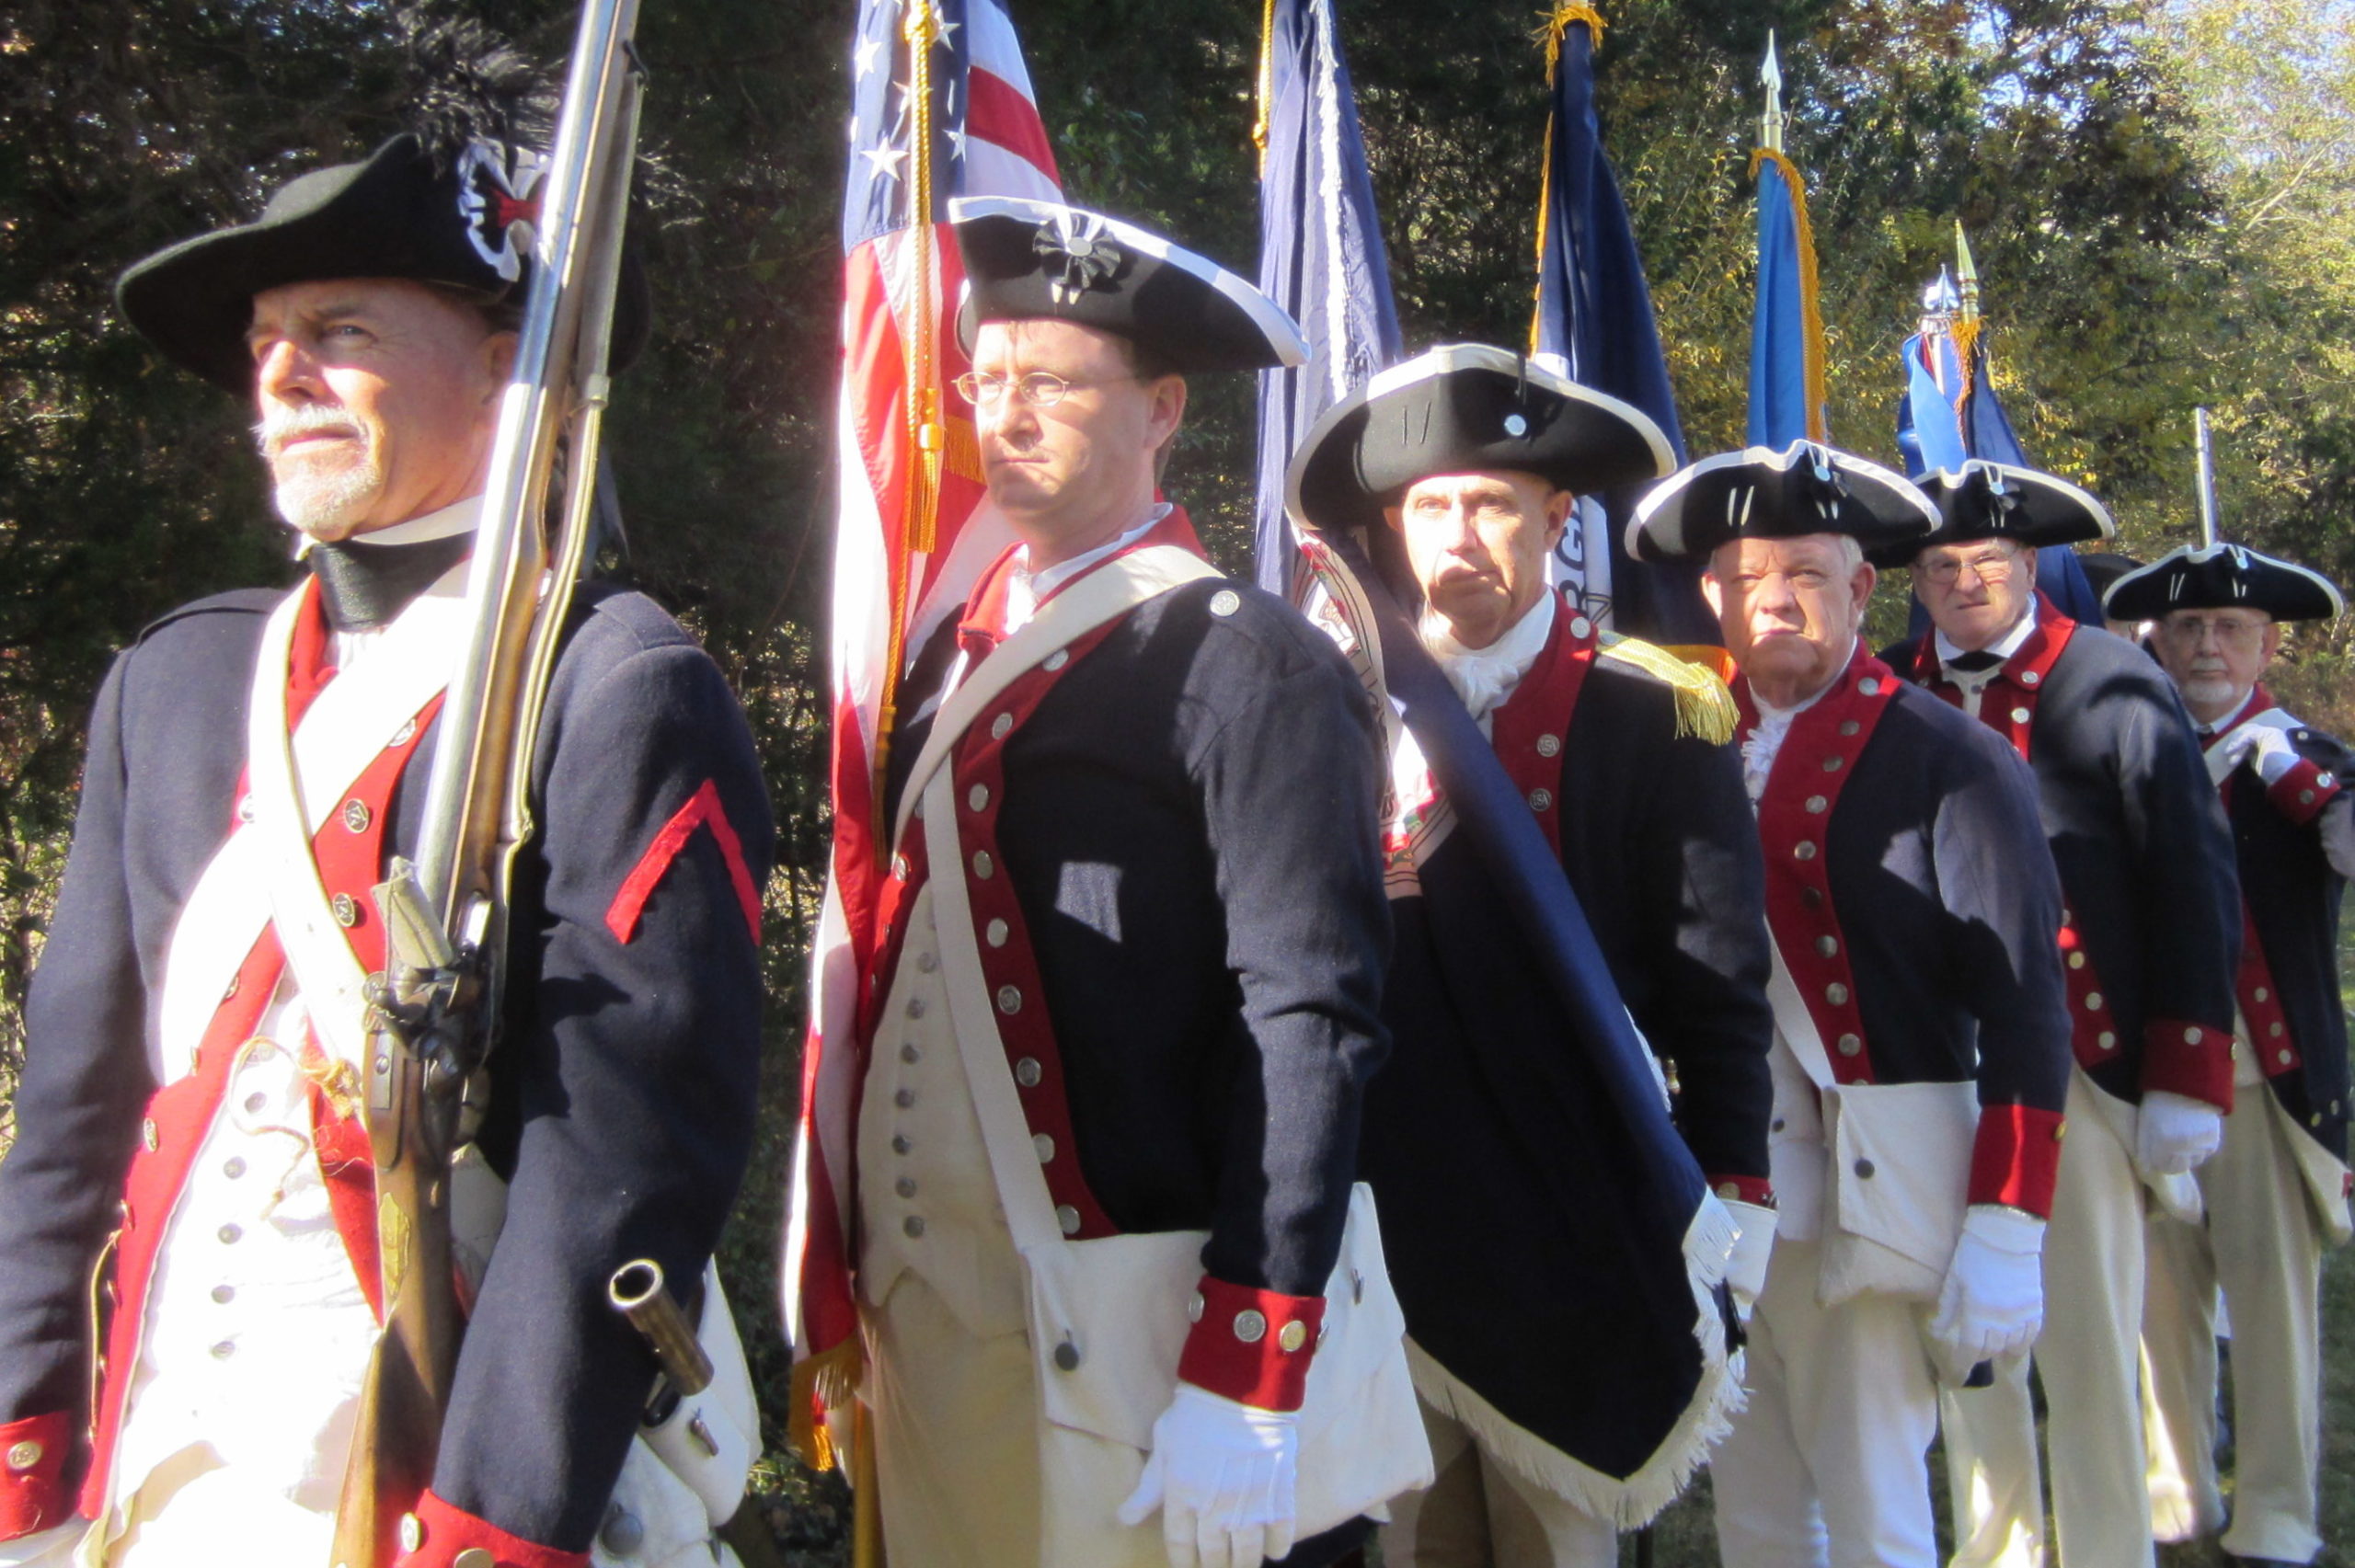 Revolutionary War Color Guard ready to march